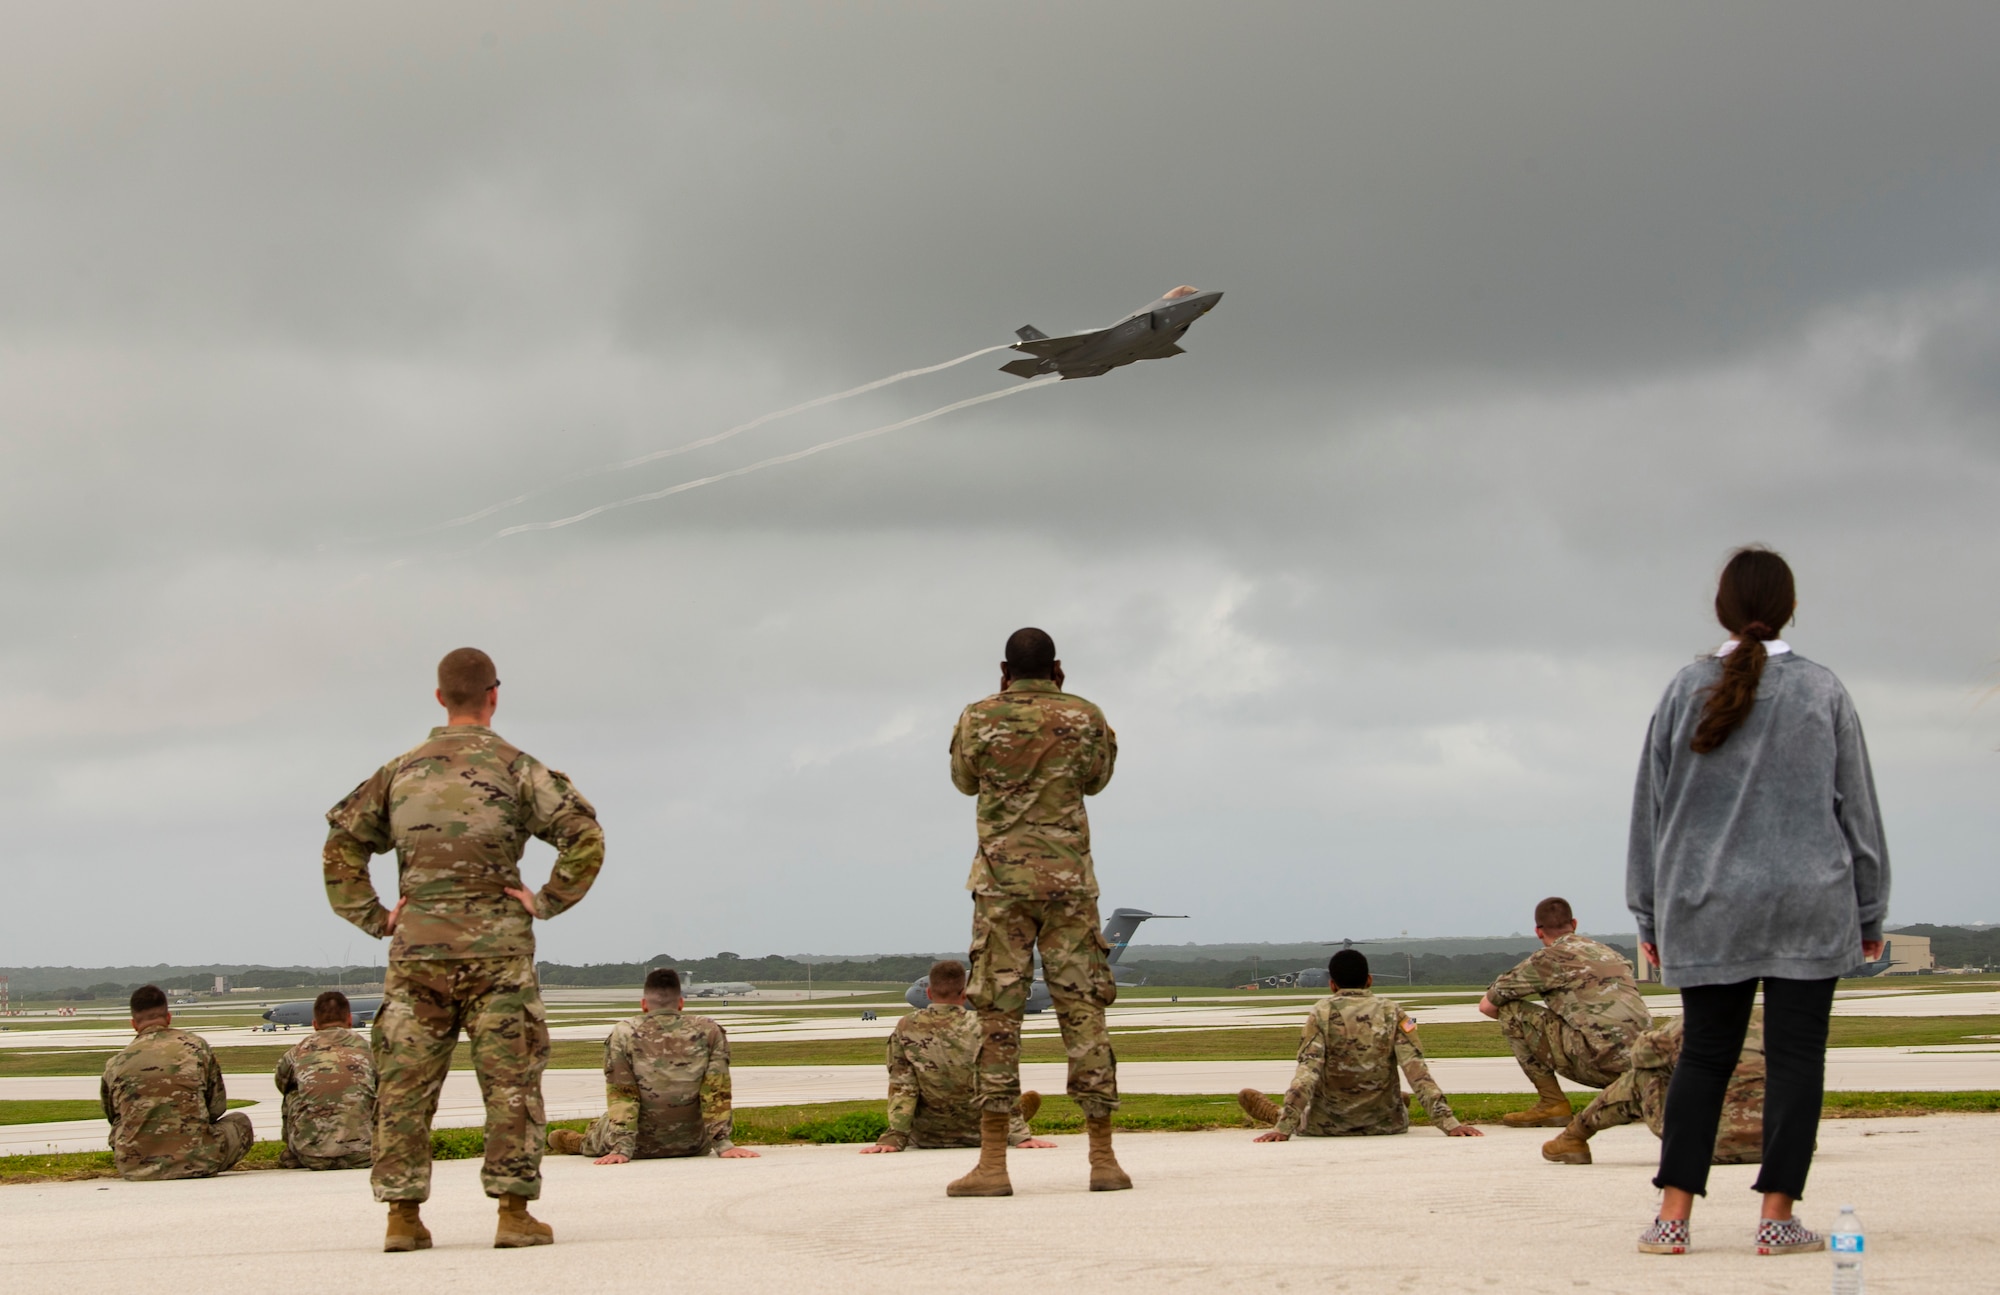 Members from Team Andersen watch a U.S. Air Force F-35A Lightning II Exercise take off from Andersen Air Force Base, Guam, during a take-off viewing day for exercise Cope North 22, Feb. 9, 2022. Service members, their families and civic leaders were invited to the flight line to learn the importance of Cope North while observing aircraft capabilities.  Exercise Cope North is the U.S. Pacific Air Forces’ largest multilateral exercise and includes more than 2, 500 U.S. Airmen, Marines, and Sailors working alongside 1,000 combined Japan Air Self-Defense Force and Royal Australian Air Force counterparts.